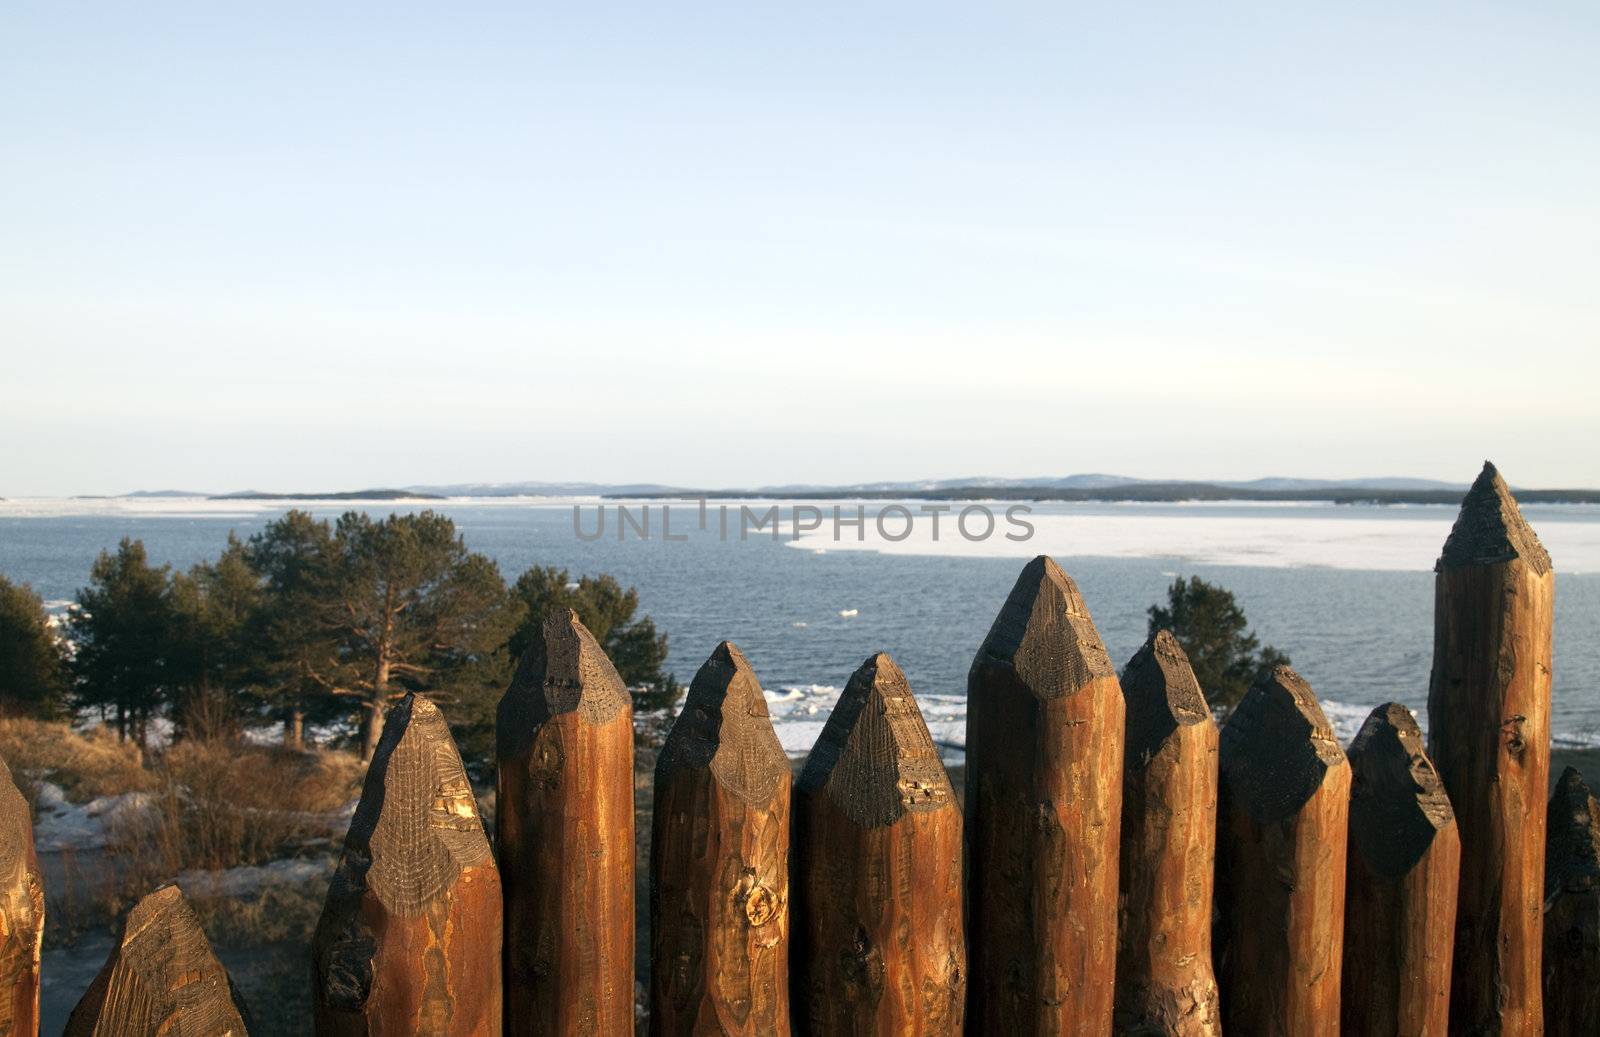 Sea view from behind the stockade